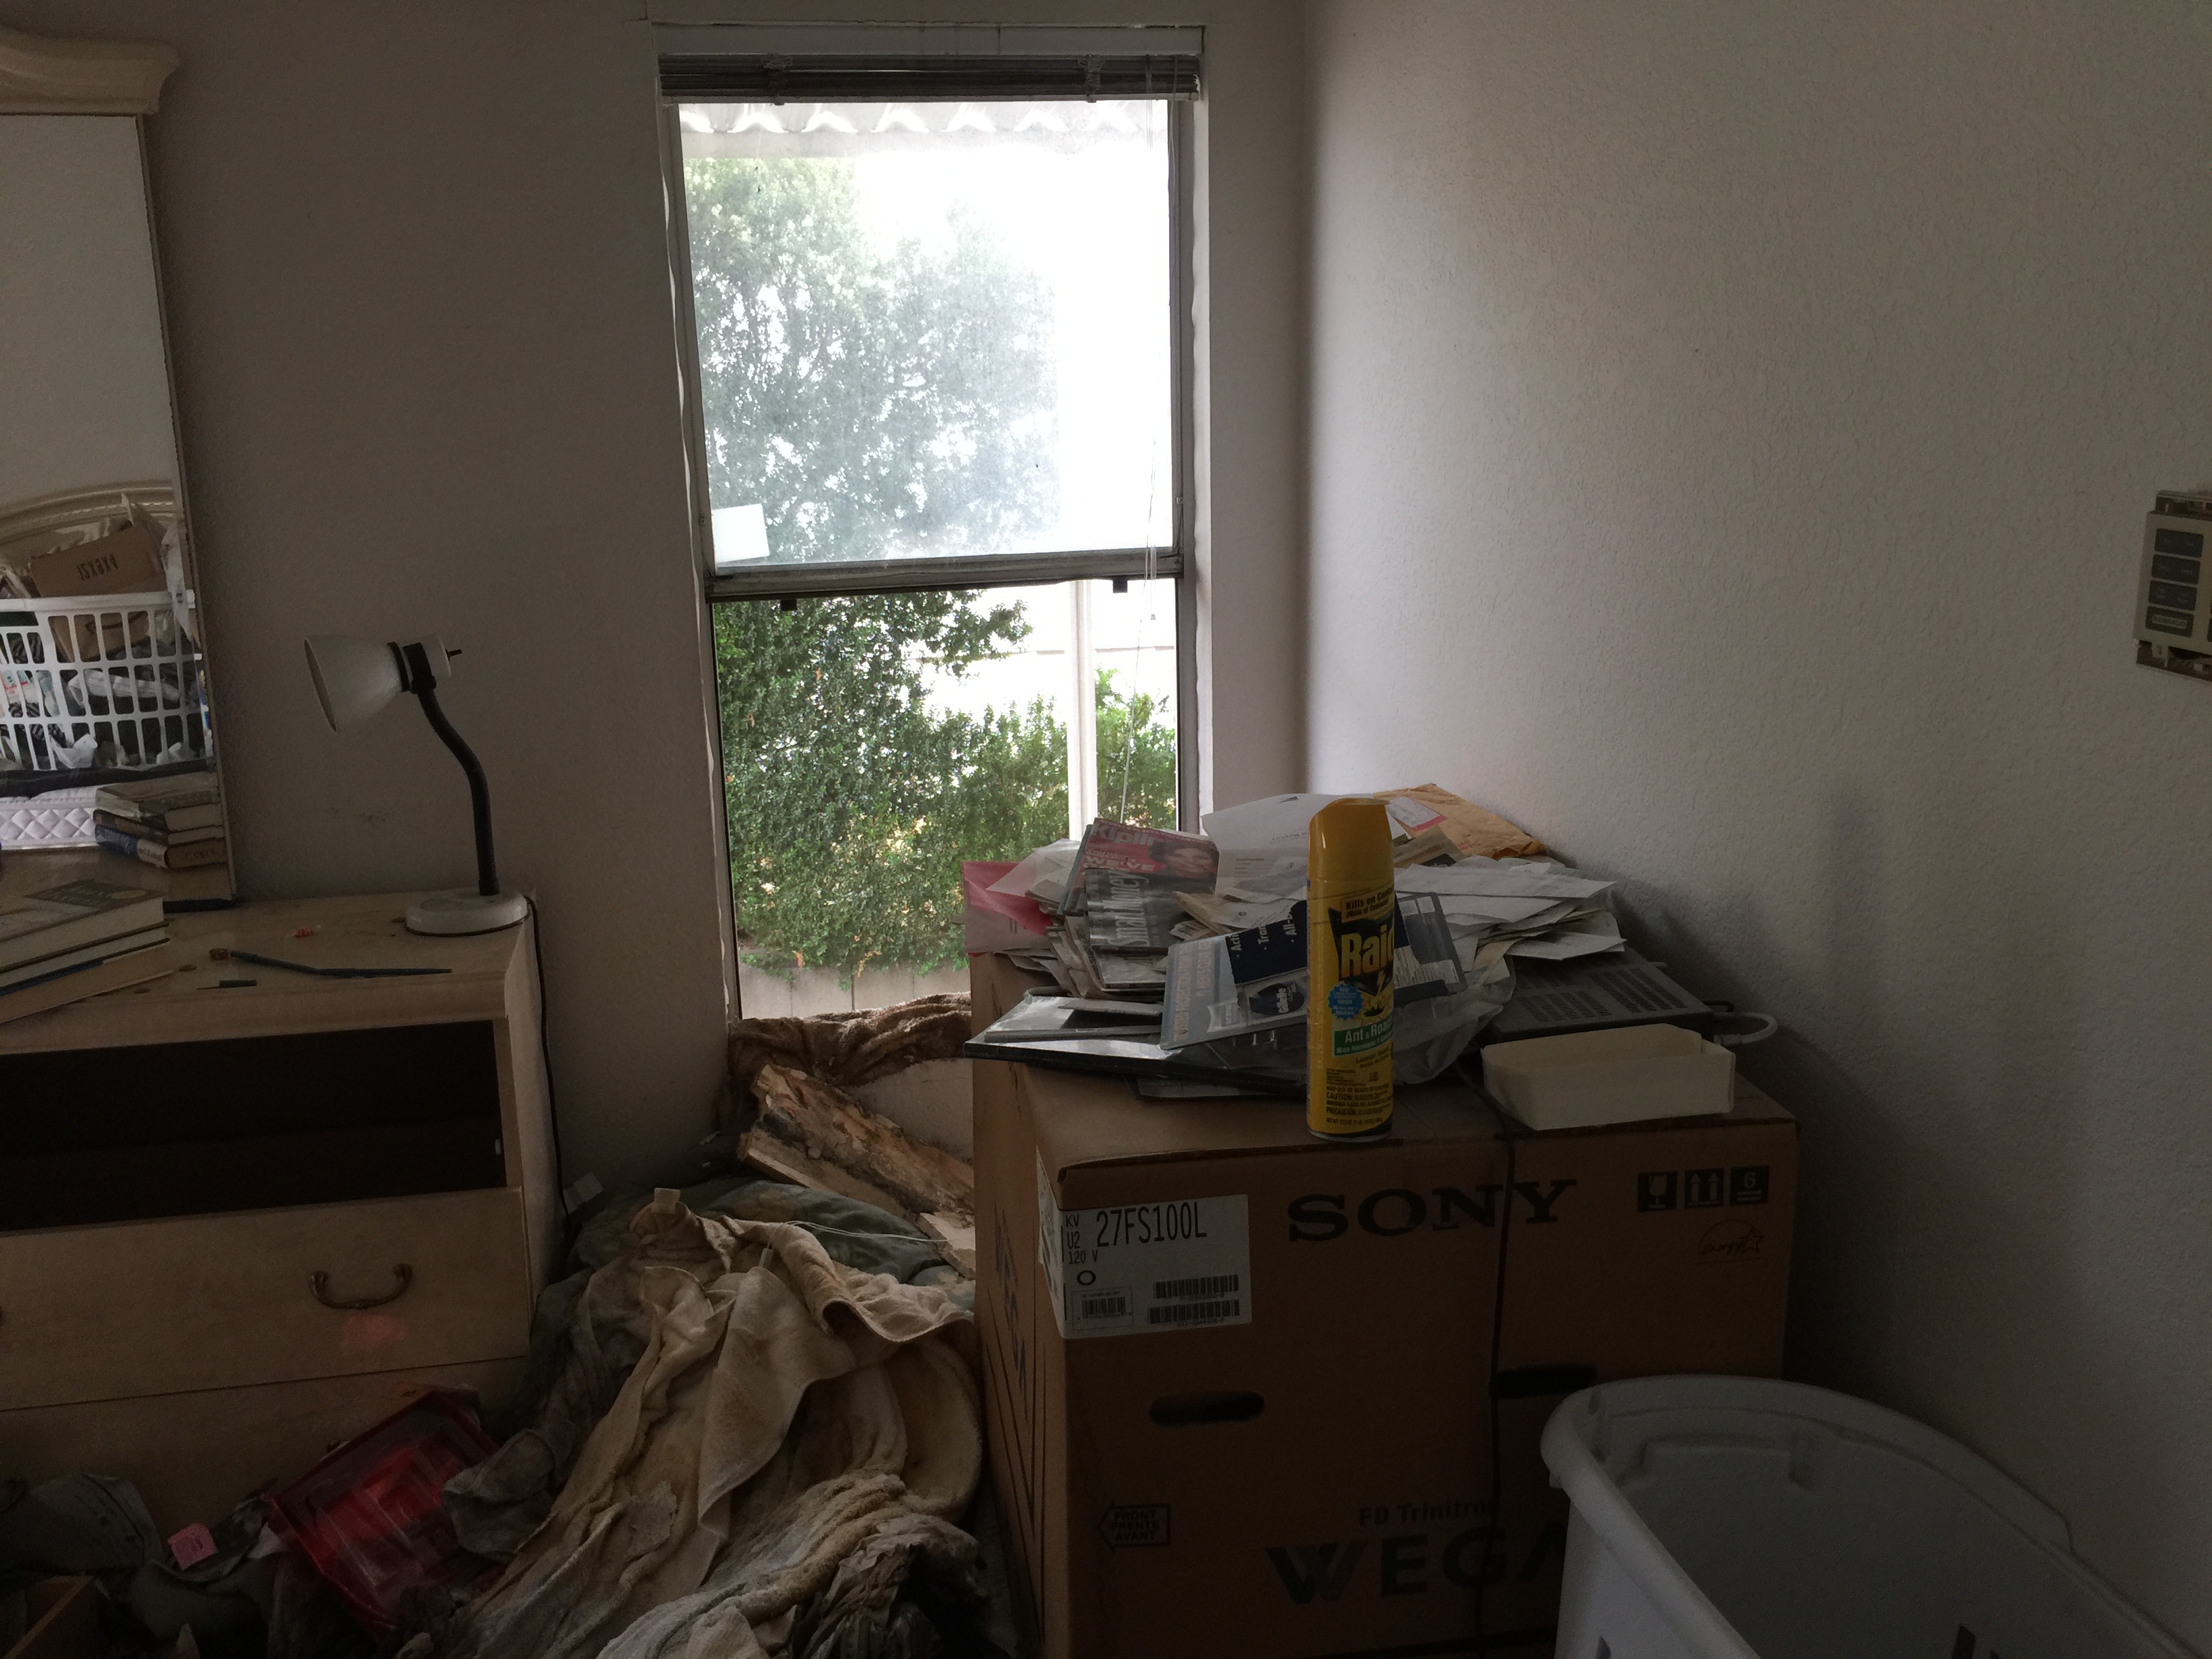 hoarder cleaning studio city